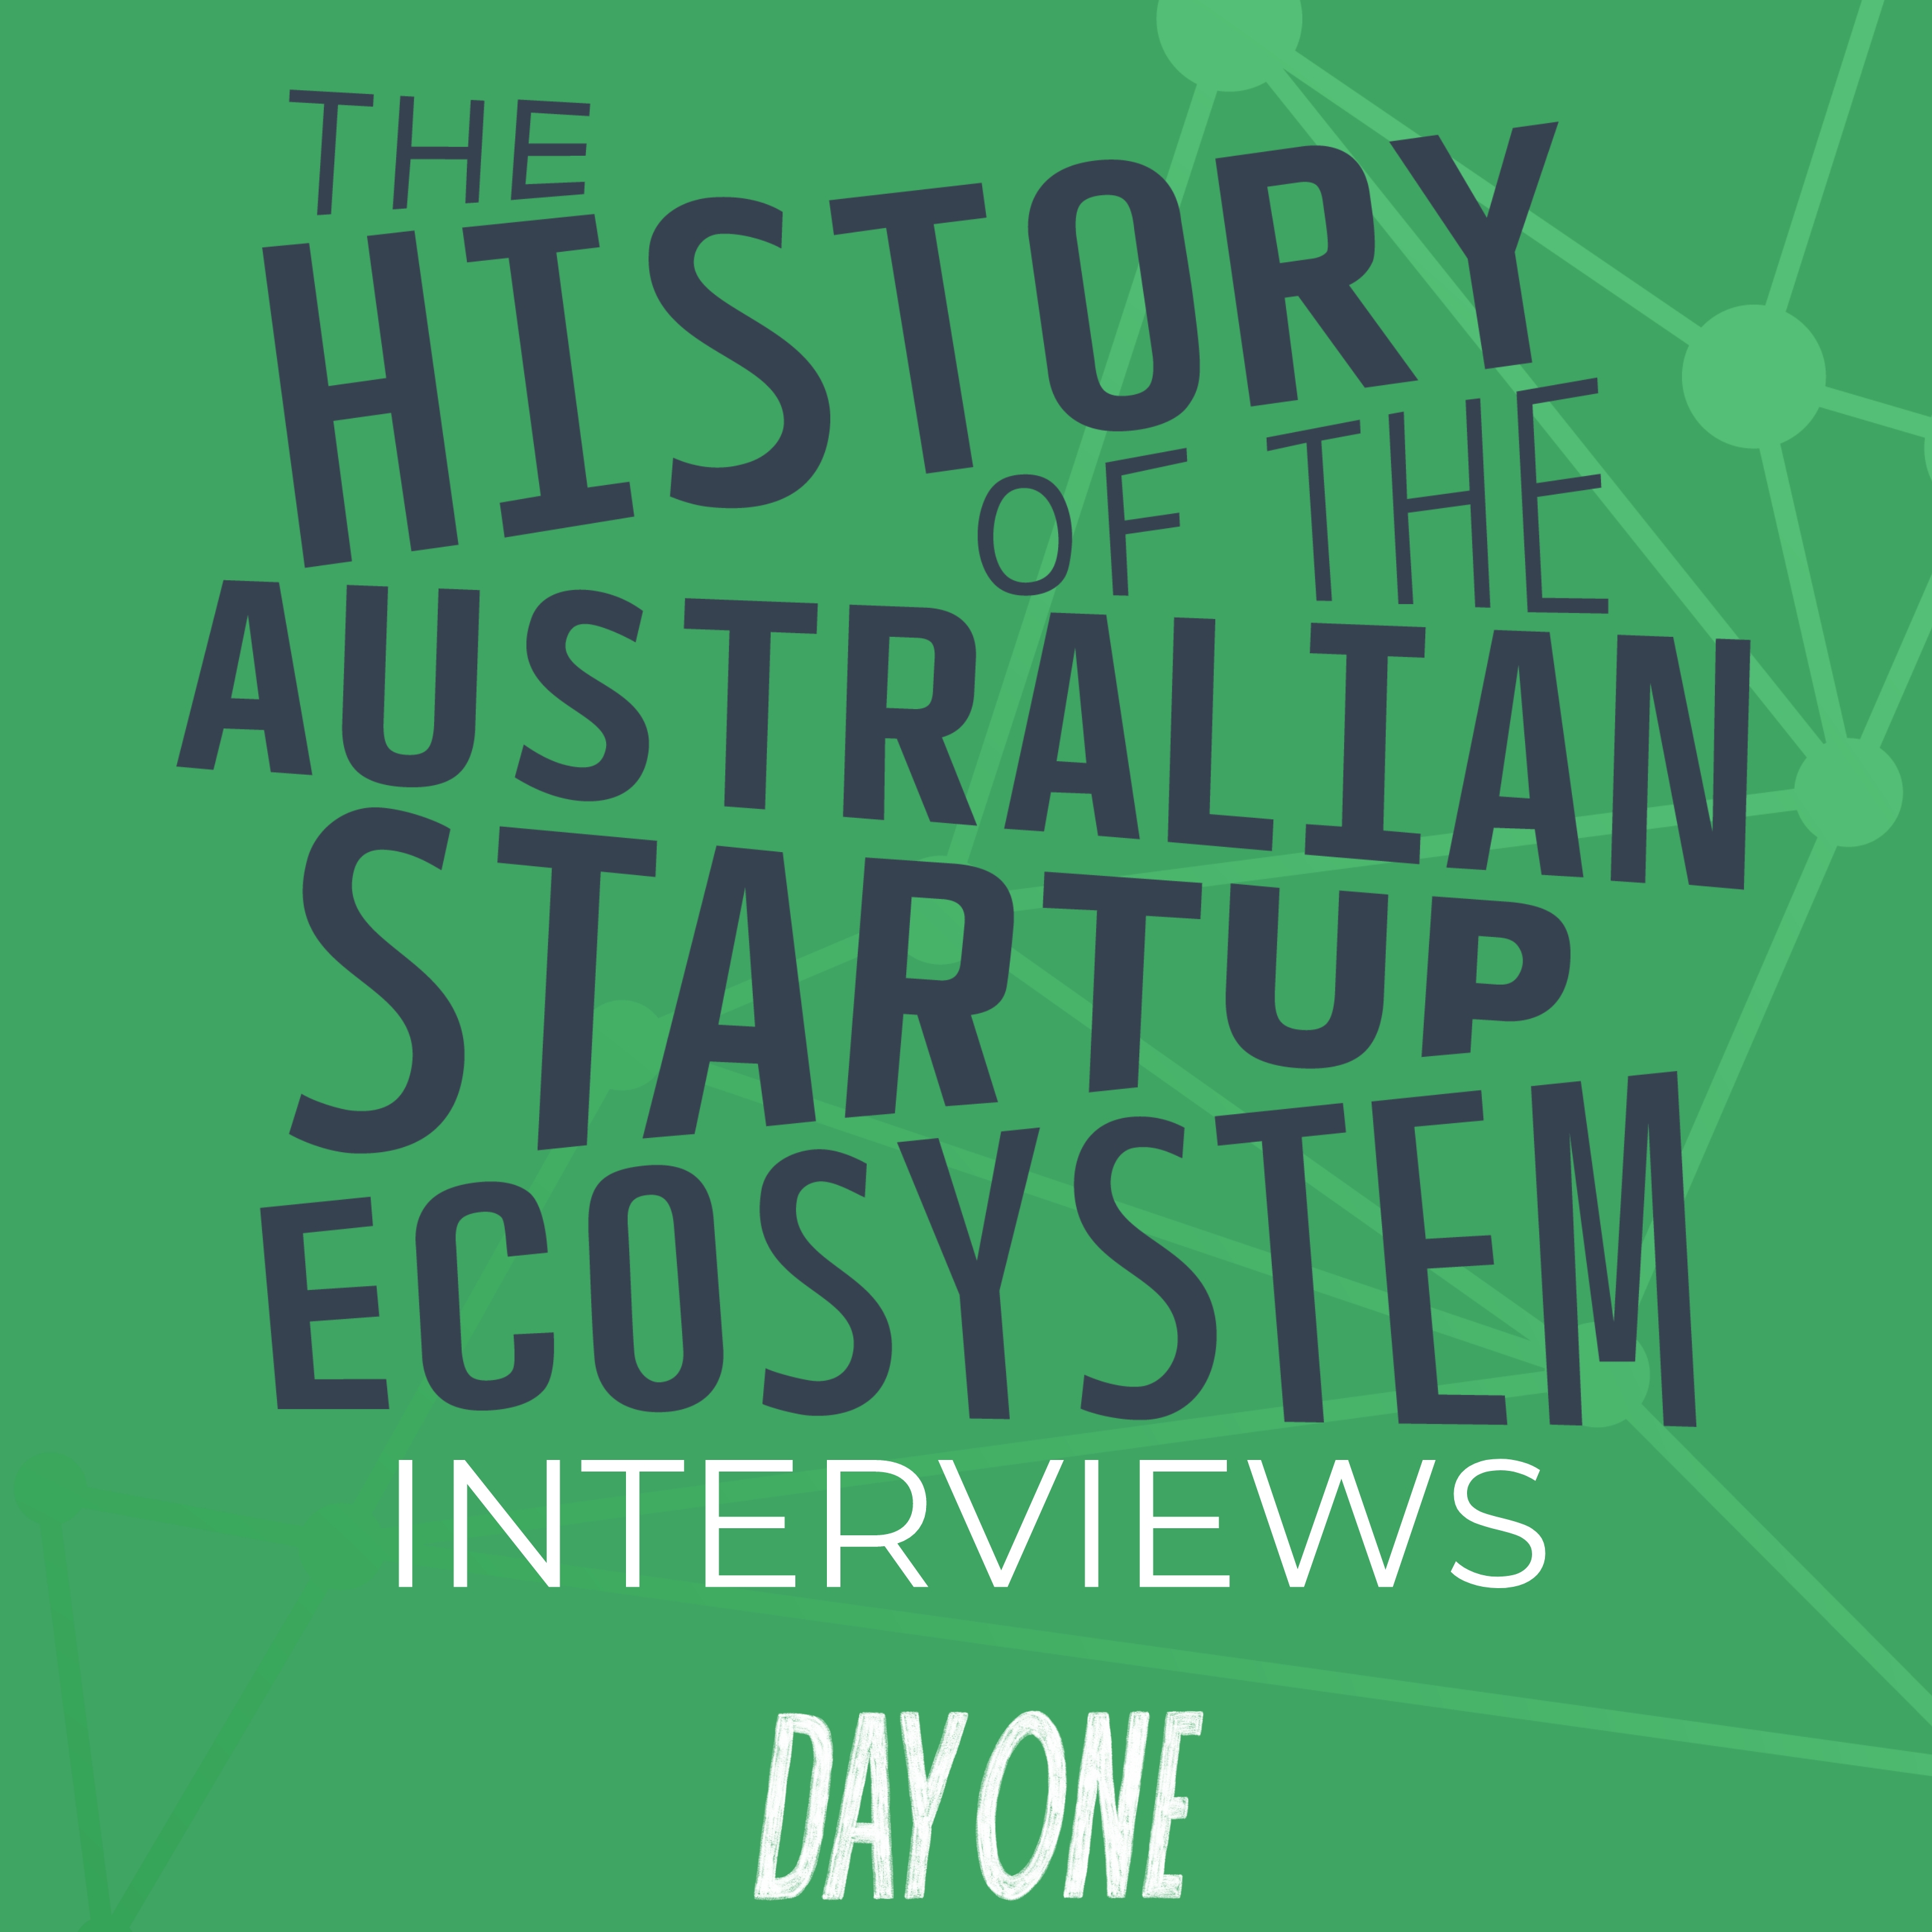 Aaron Birkby discusses the gaps in the Australian startup ecosystem